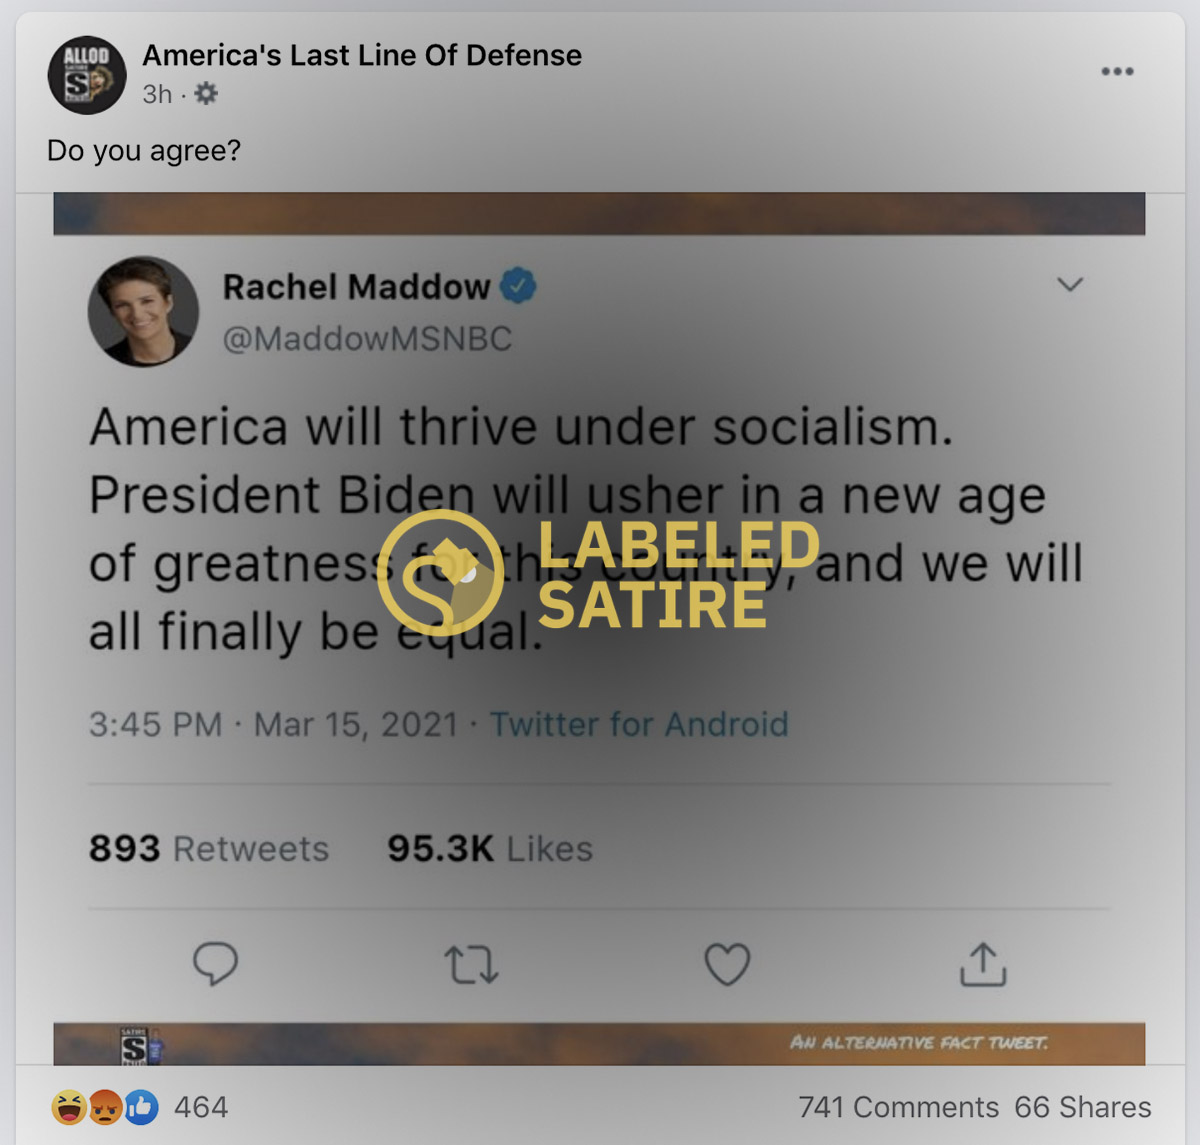 Rachel Maddow purportedly tweeted that America will thrive under socialism. This was labeled satire.